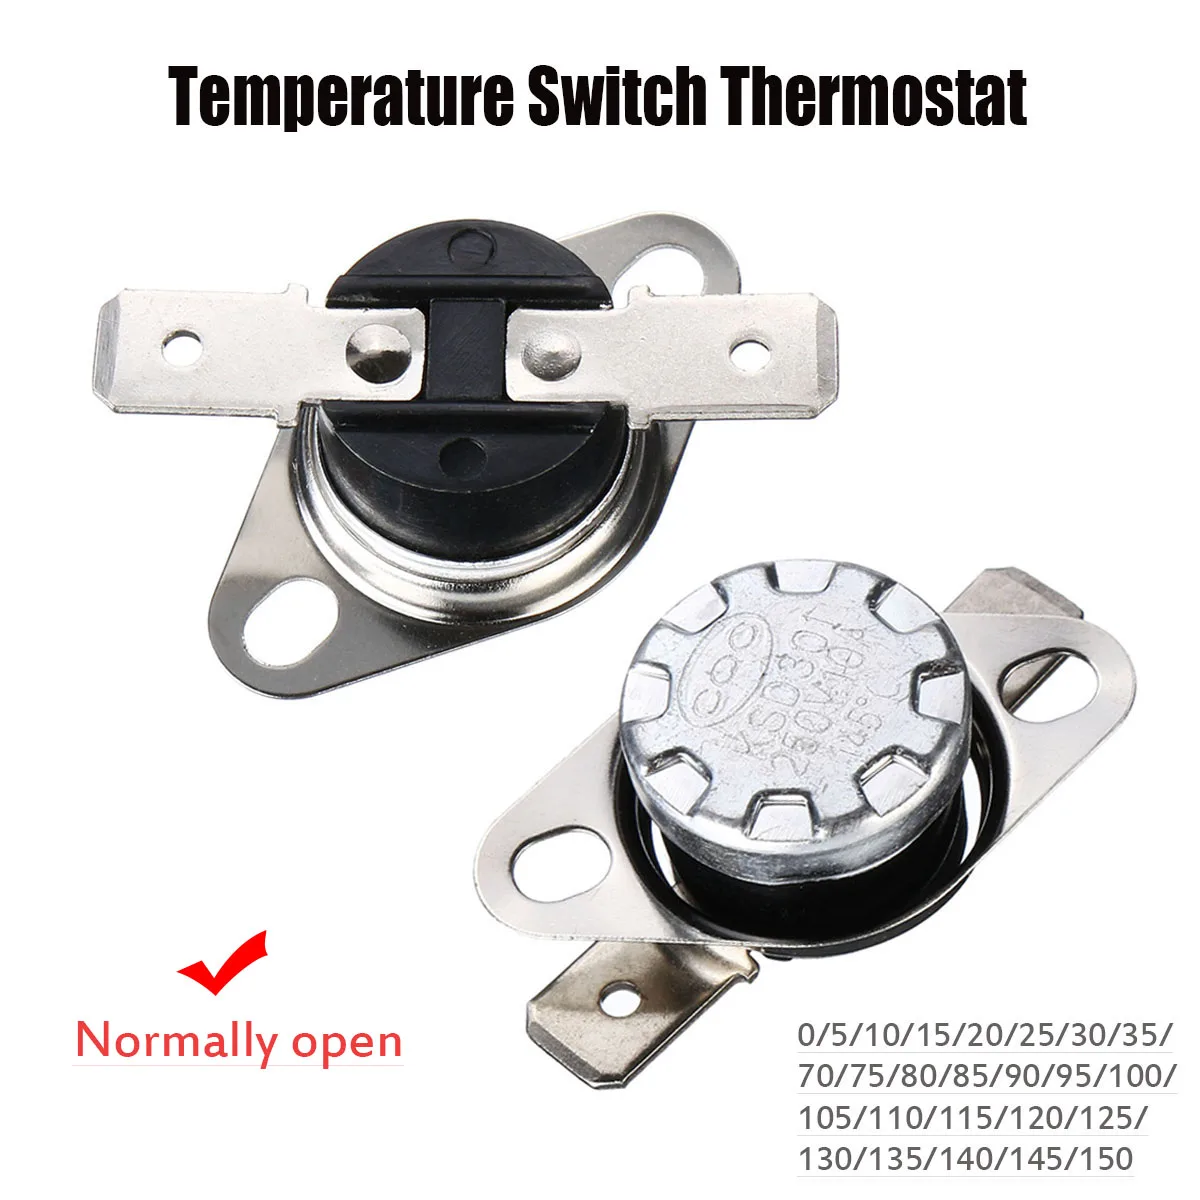 KSD301 250V 10A 70°C TEMPERATURE SWITCH THERMOSTAT NORMALLY OPEN DR48 